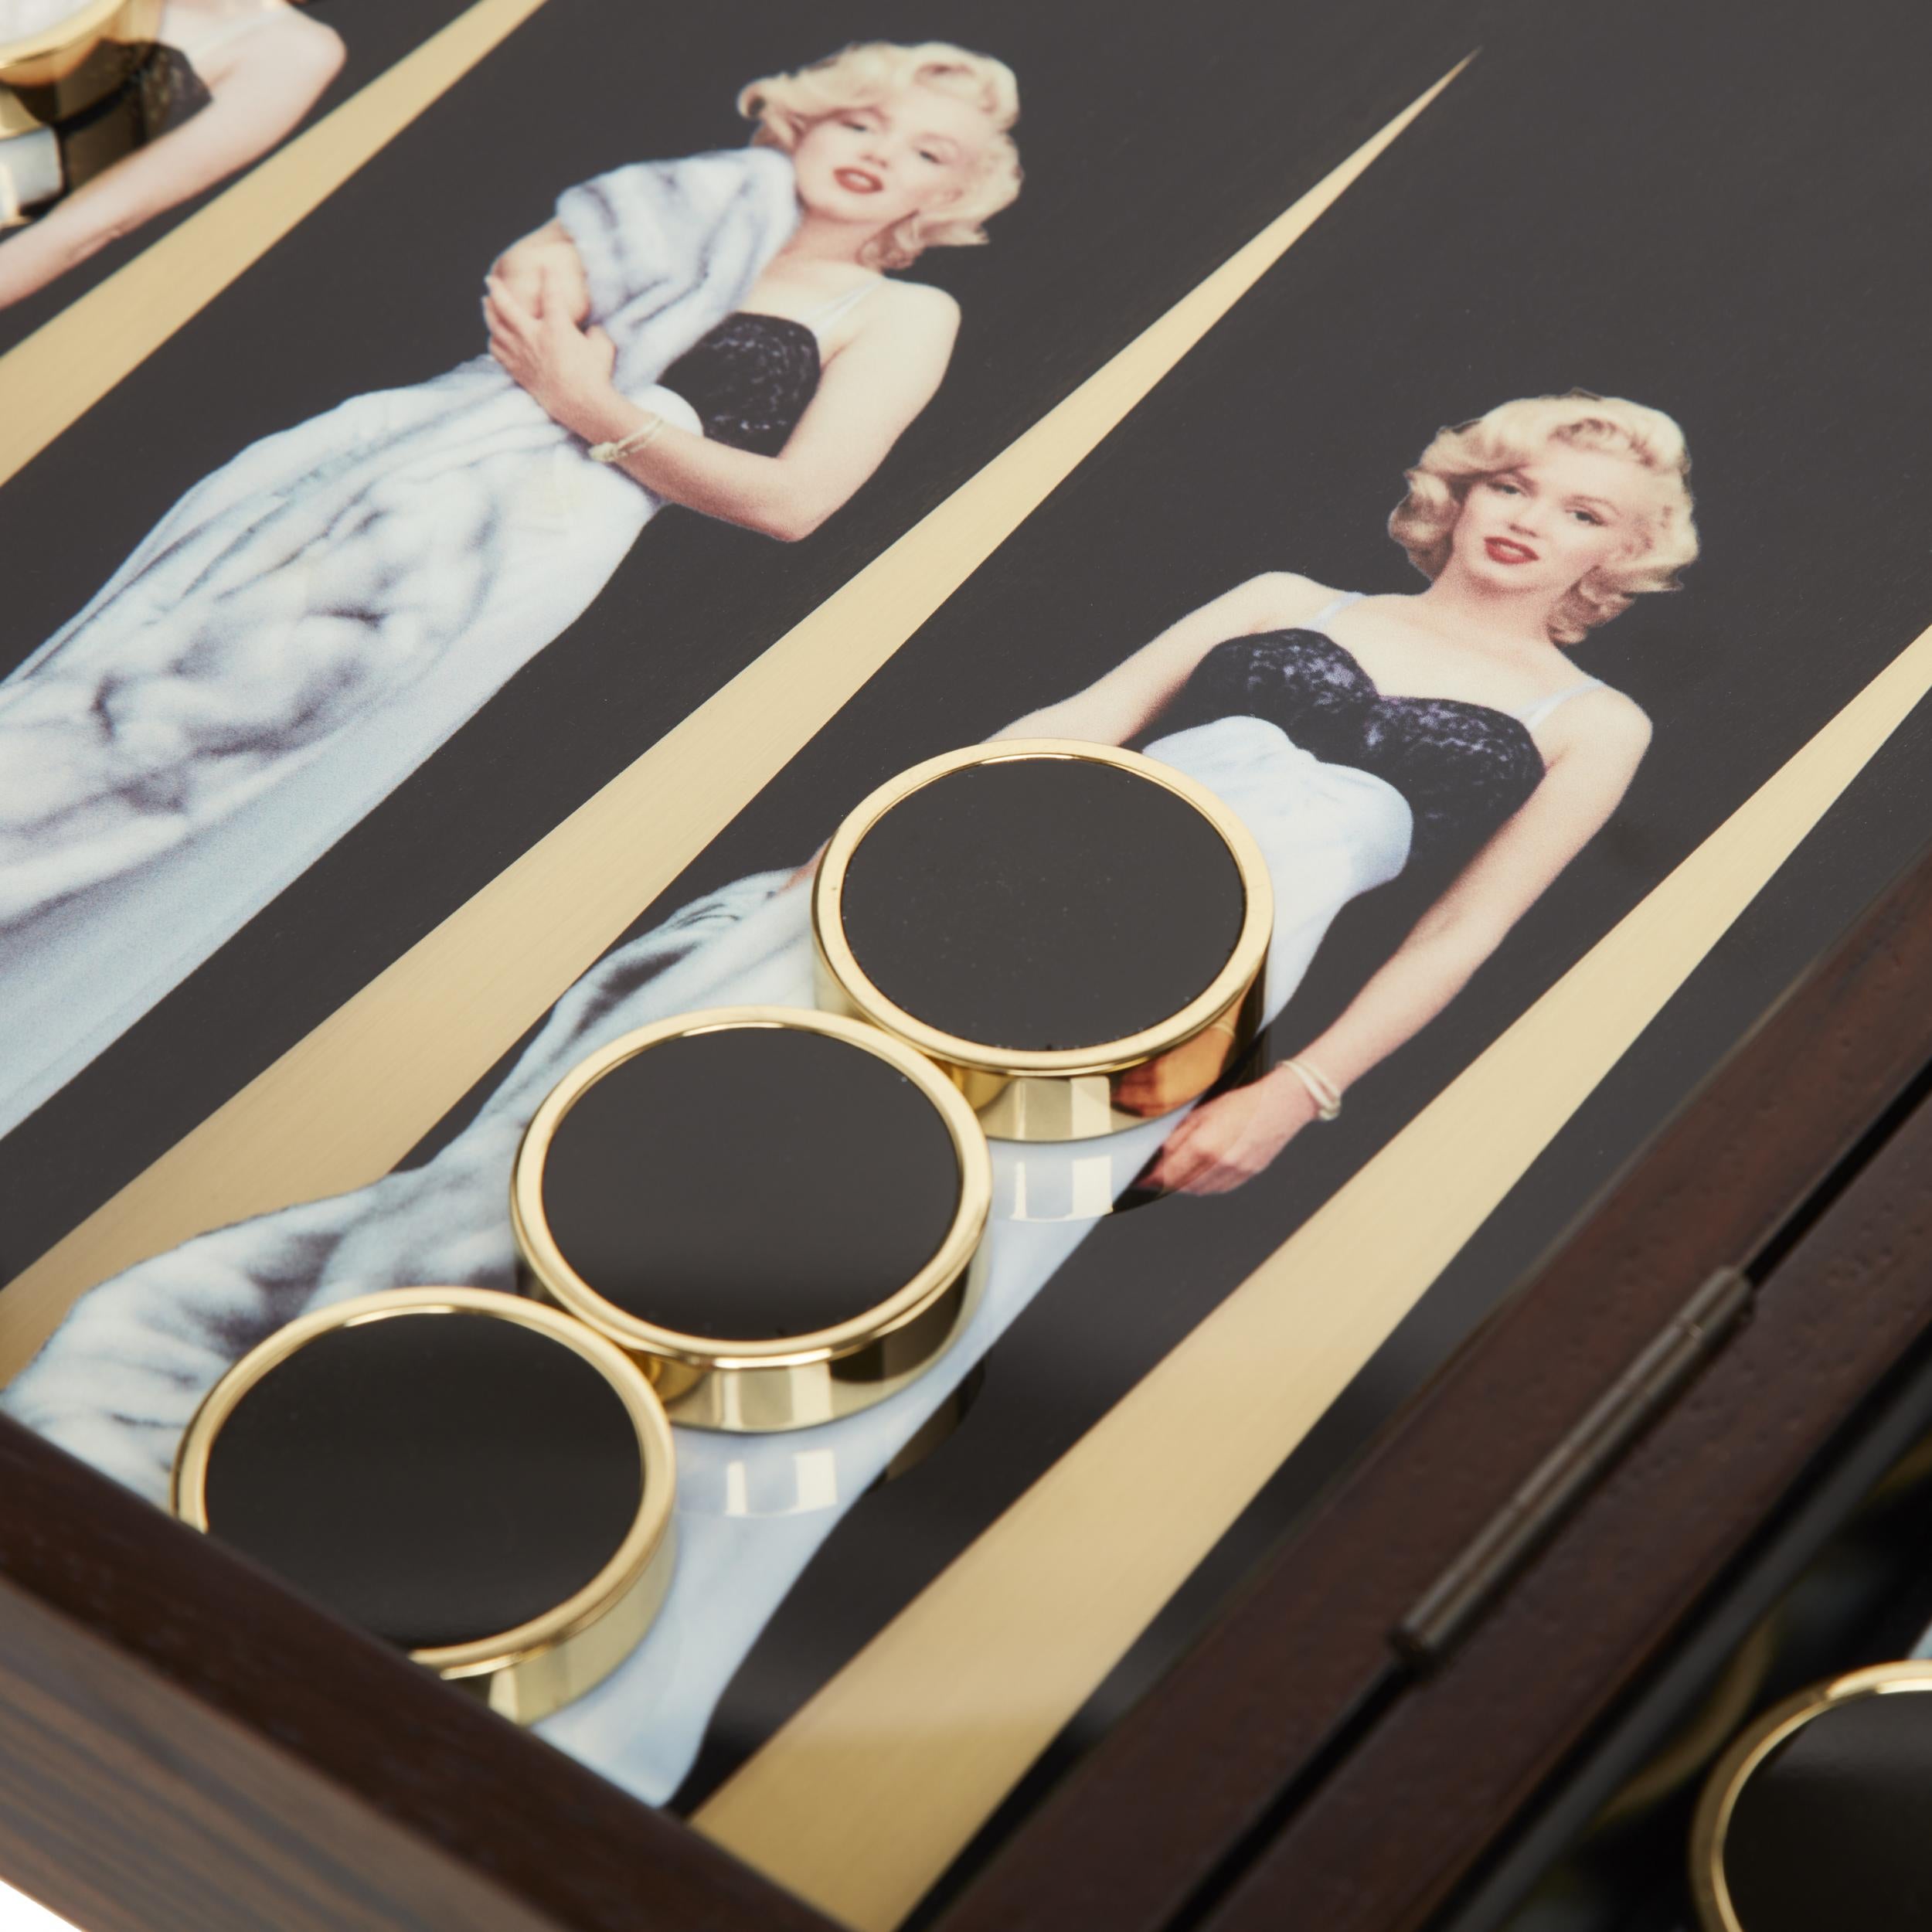 Items with a touch of uniqueness, like this Monroe backgammon set, are much-prized